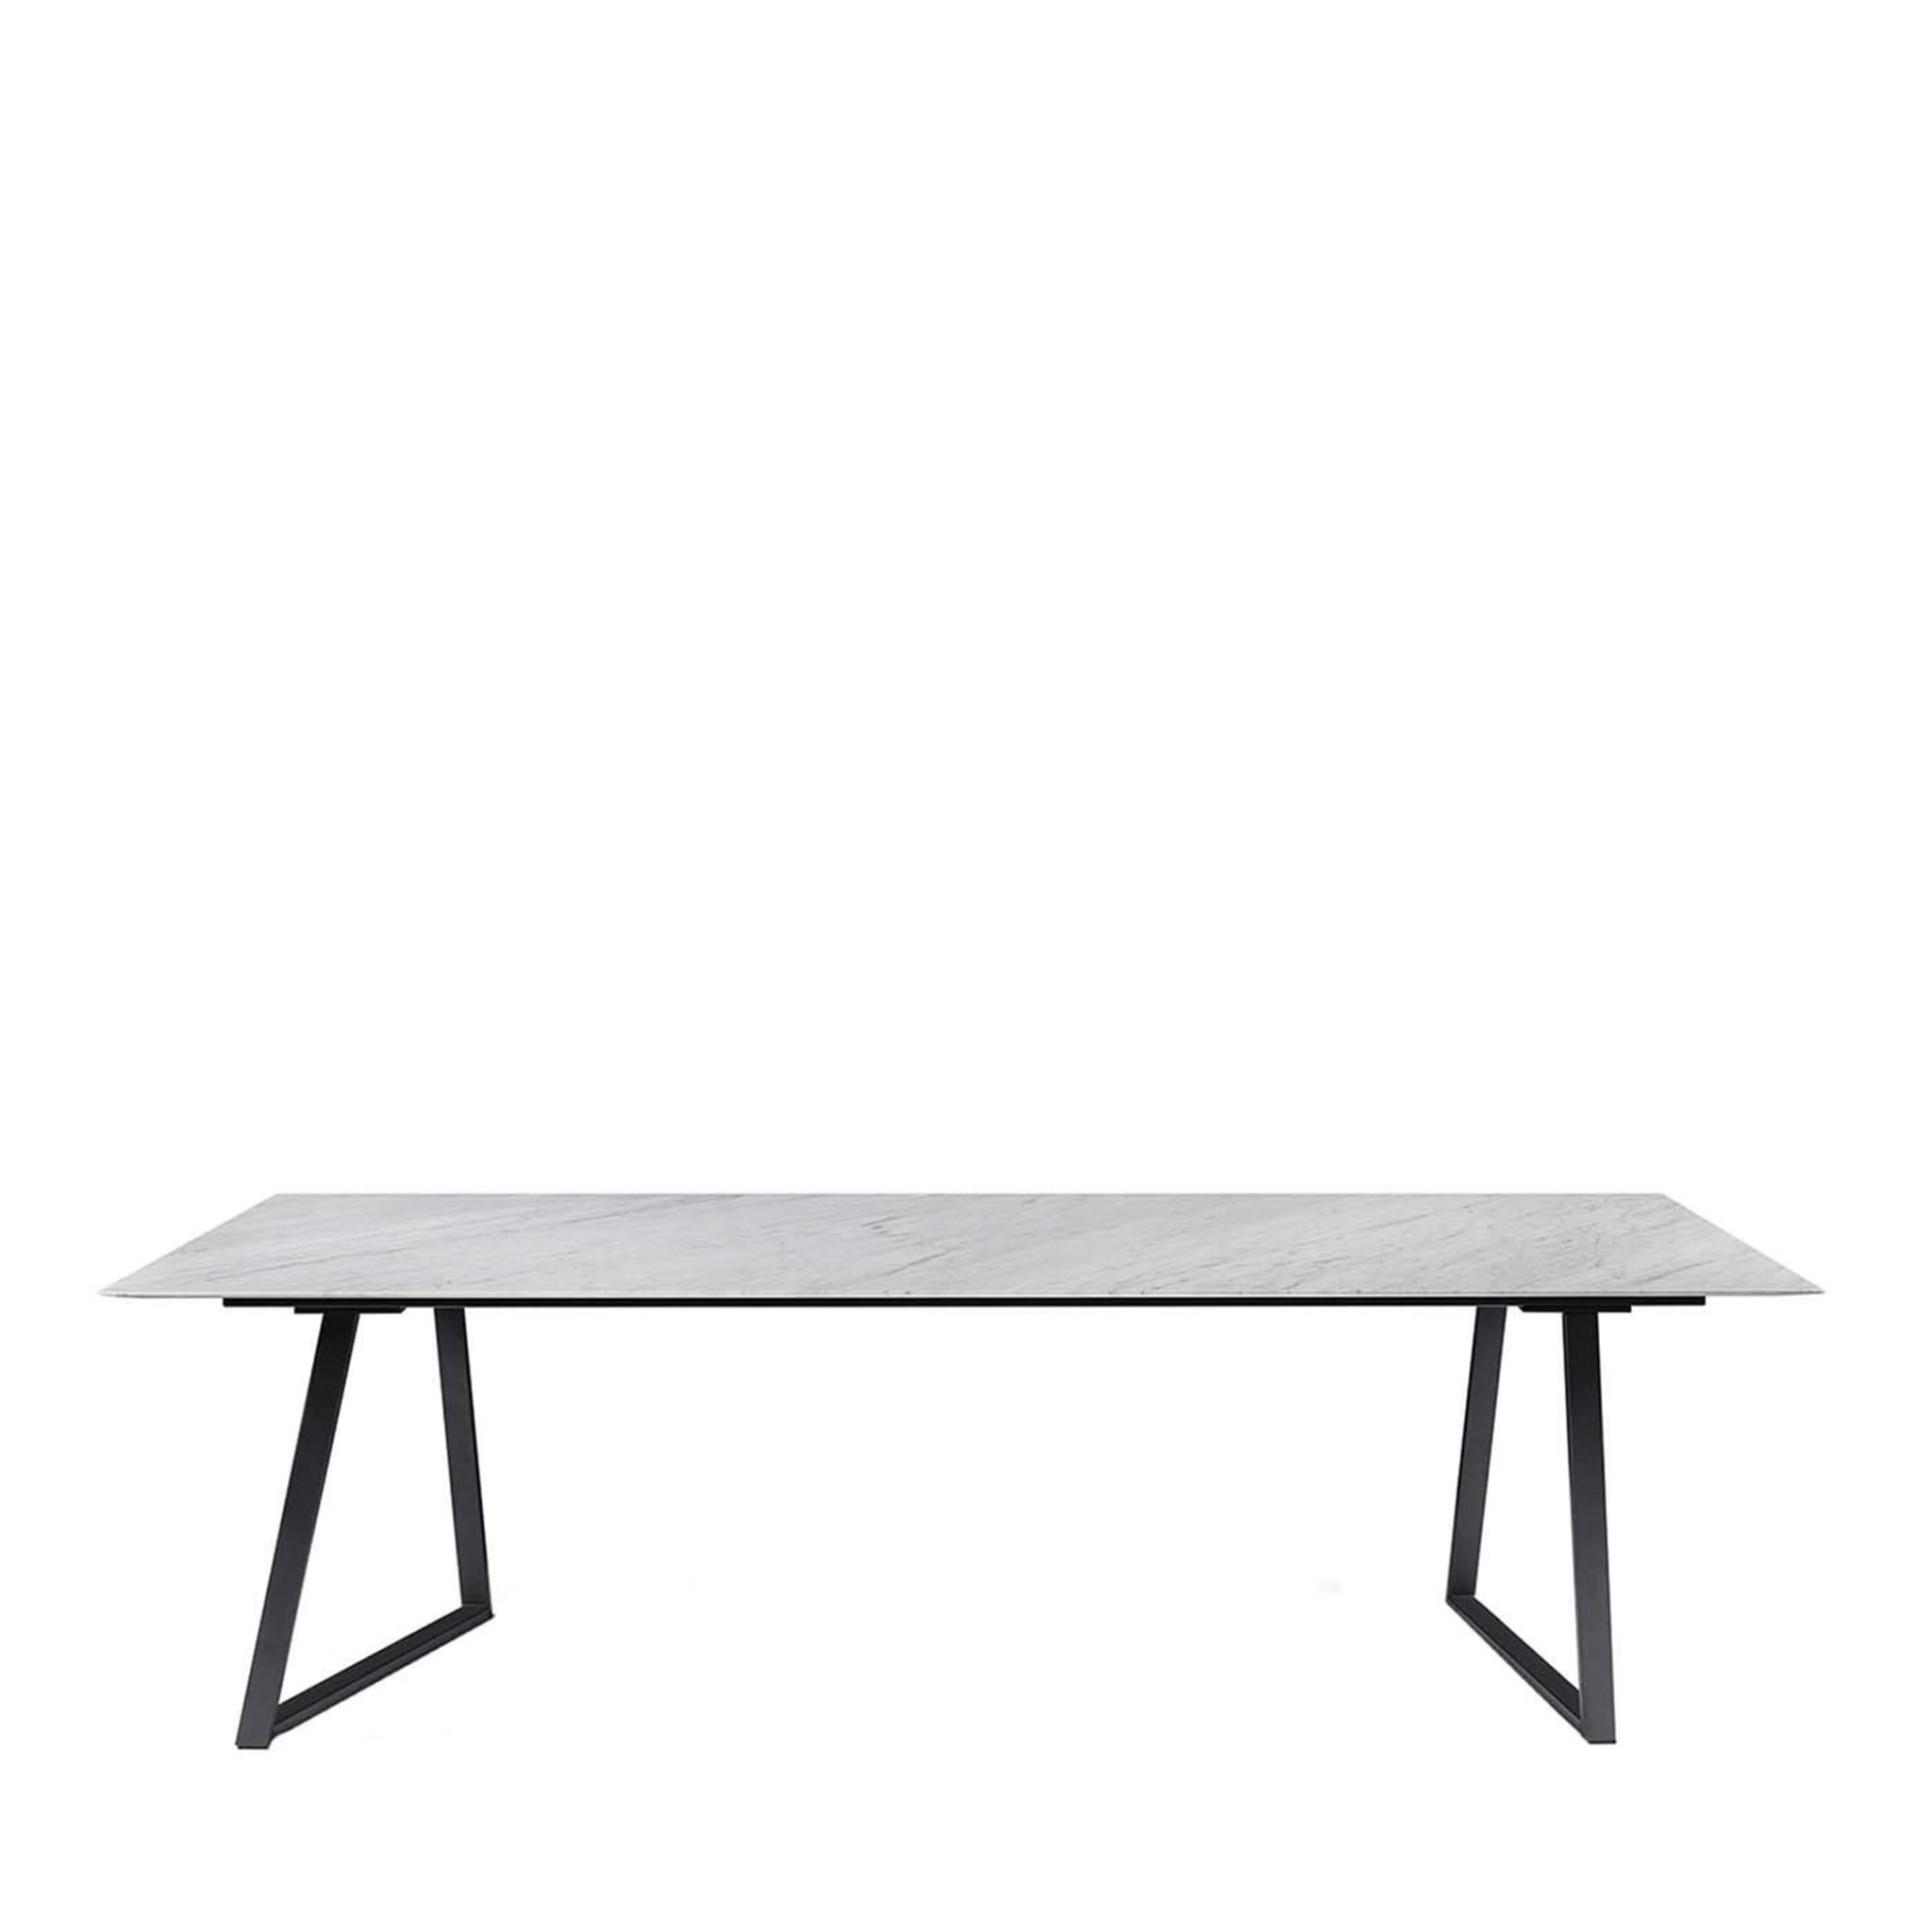 Dritto Rectangular Dining Table in Pietra d'Avola by Piero Lissoni - Main view